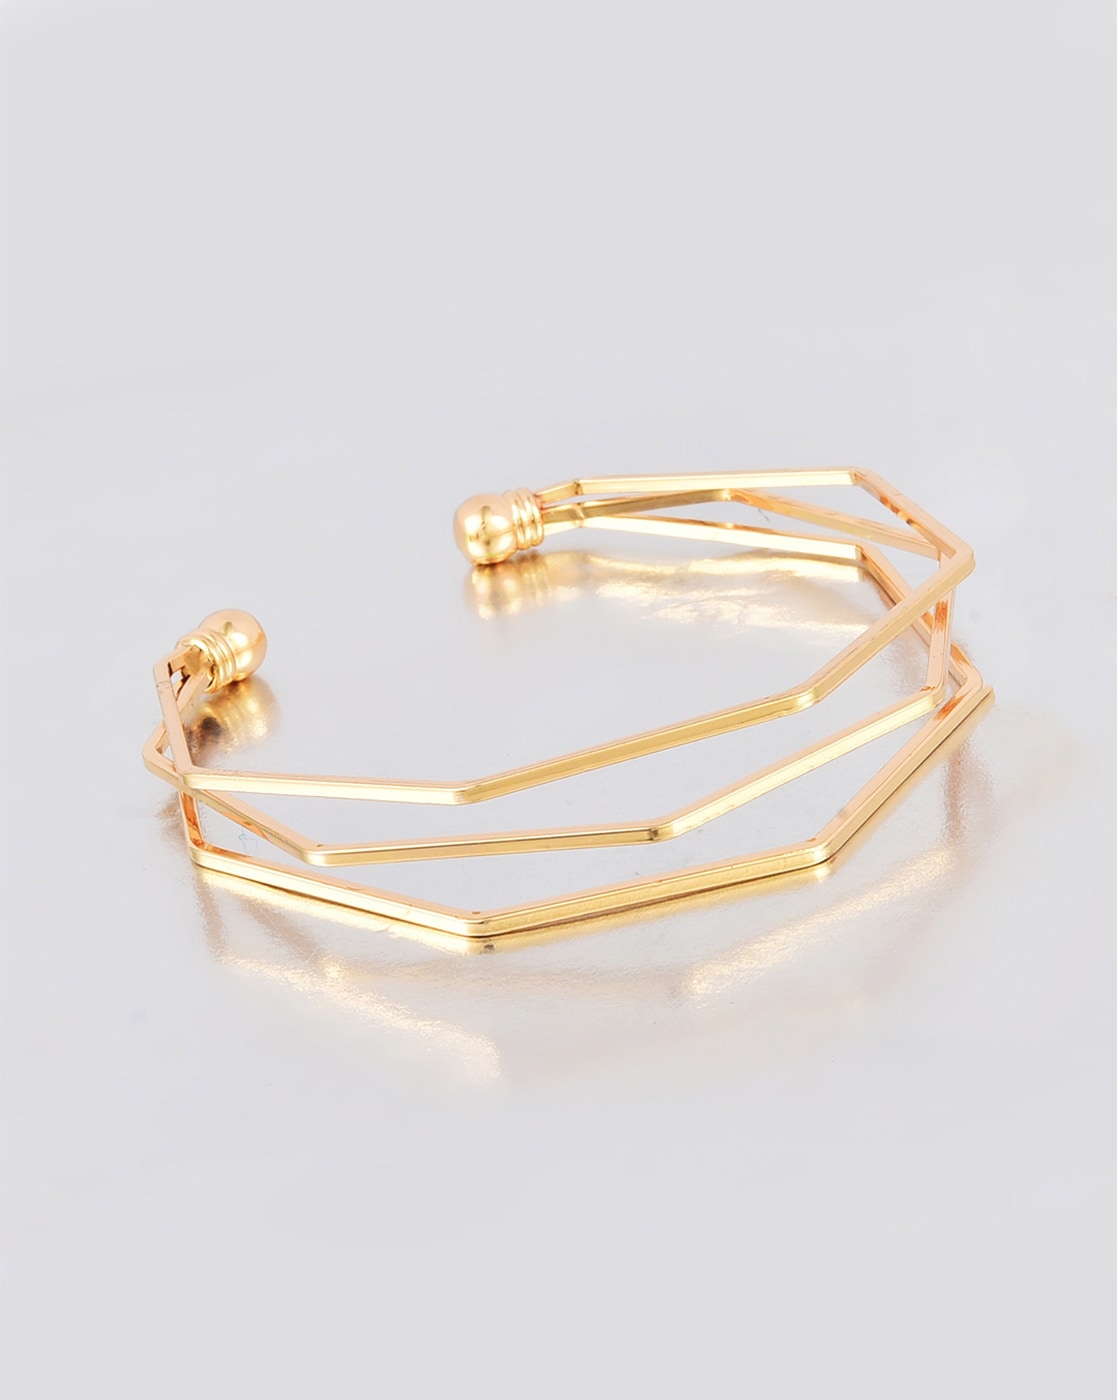 Yellow Chimes Karma Bands Collection Inspirational Message Cuff Bracelet  Buy Yellow Chimes Karma Bands Collection Inspirational Message Cuff  Bracelet Online at Best Price in India  Nykaa